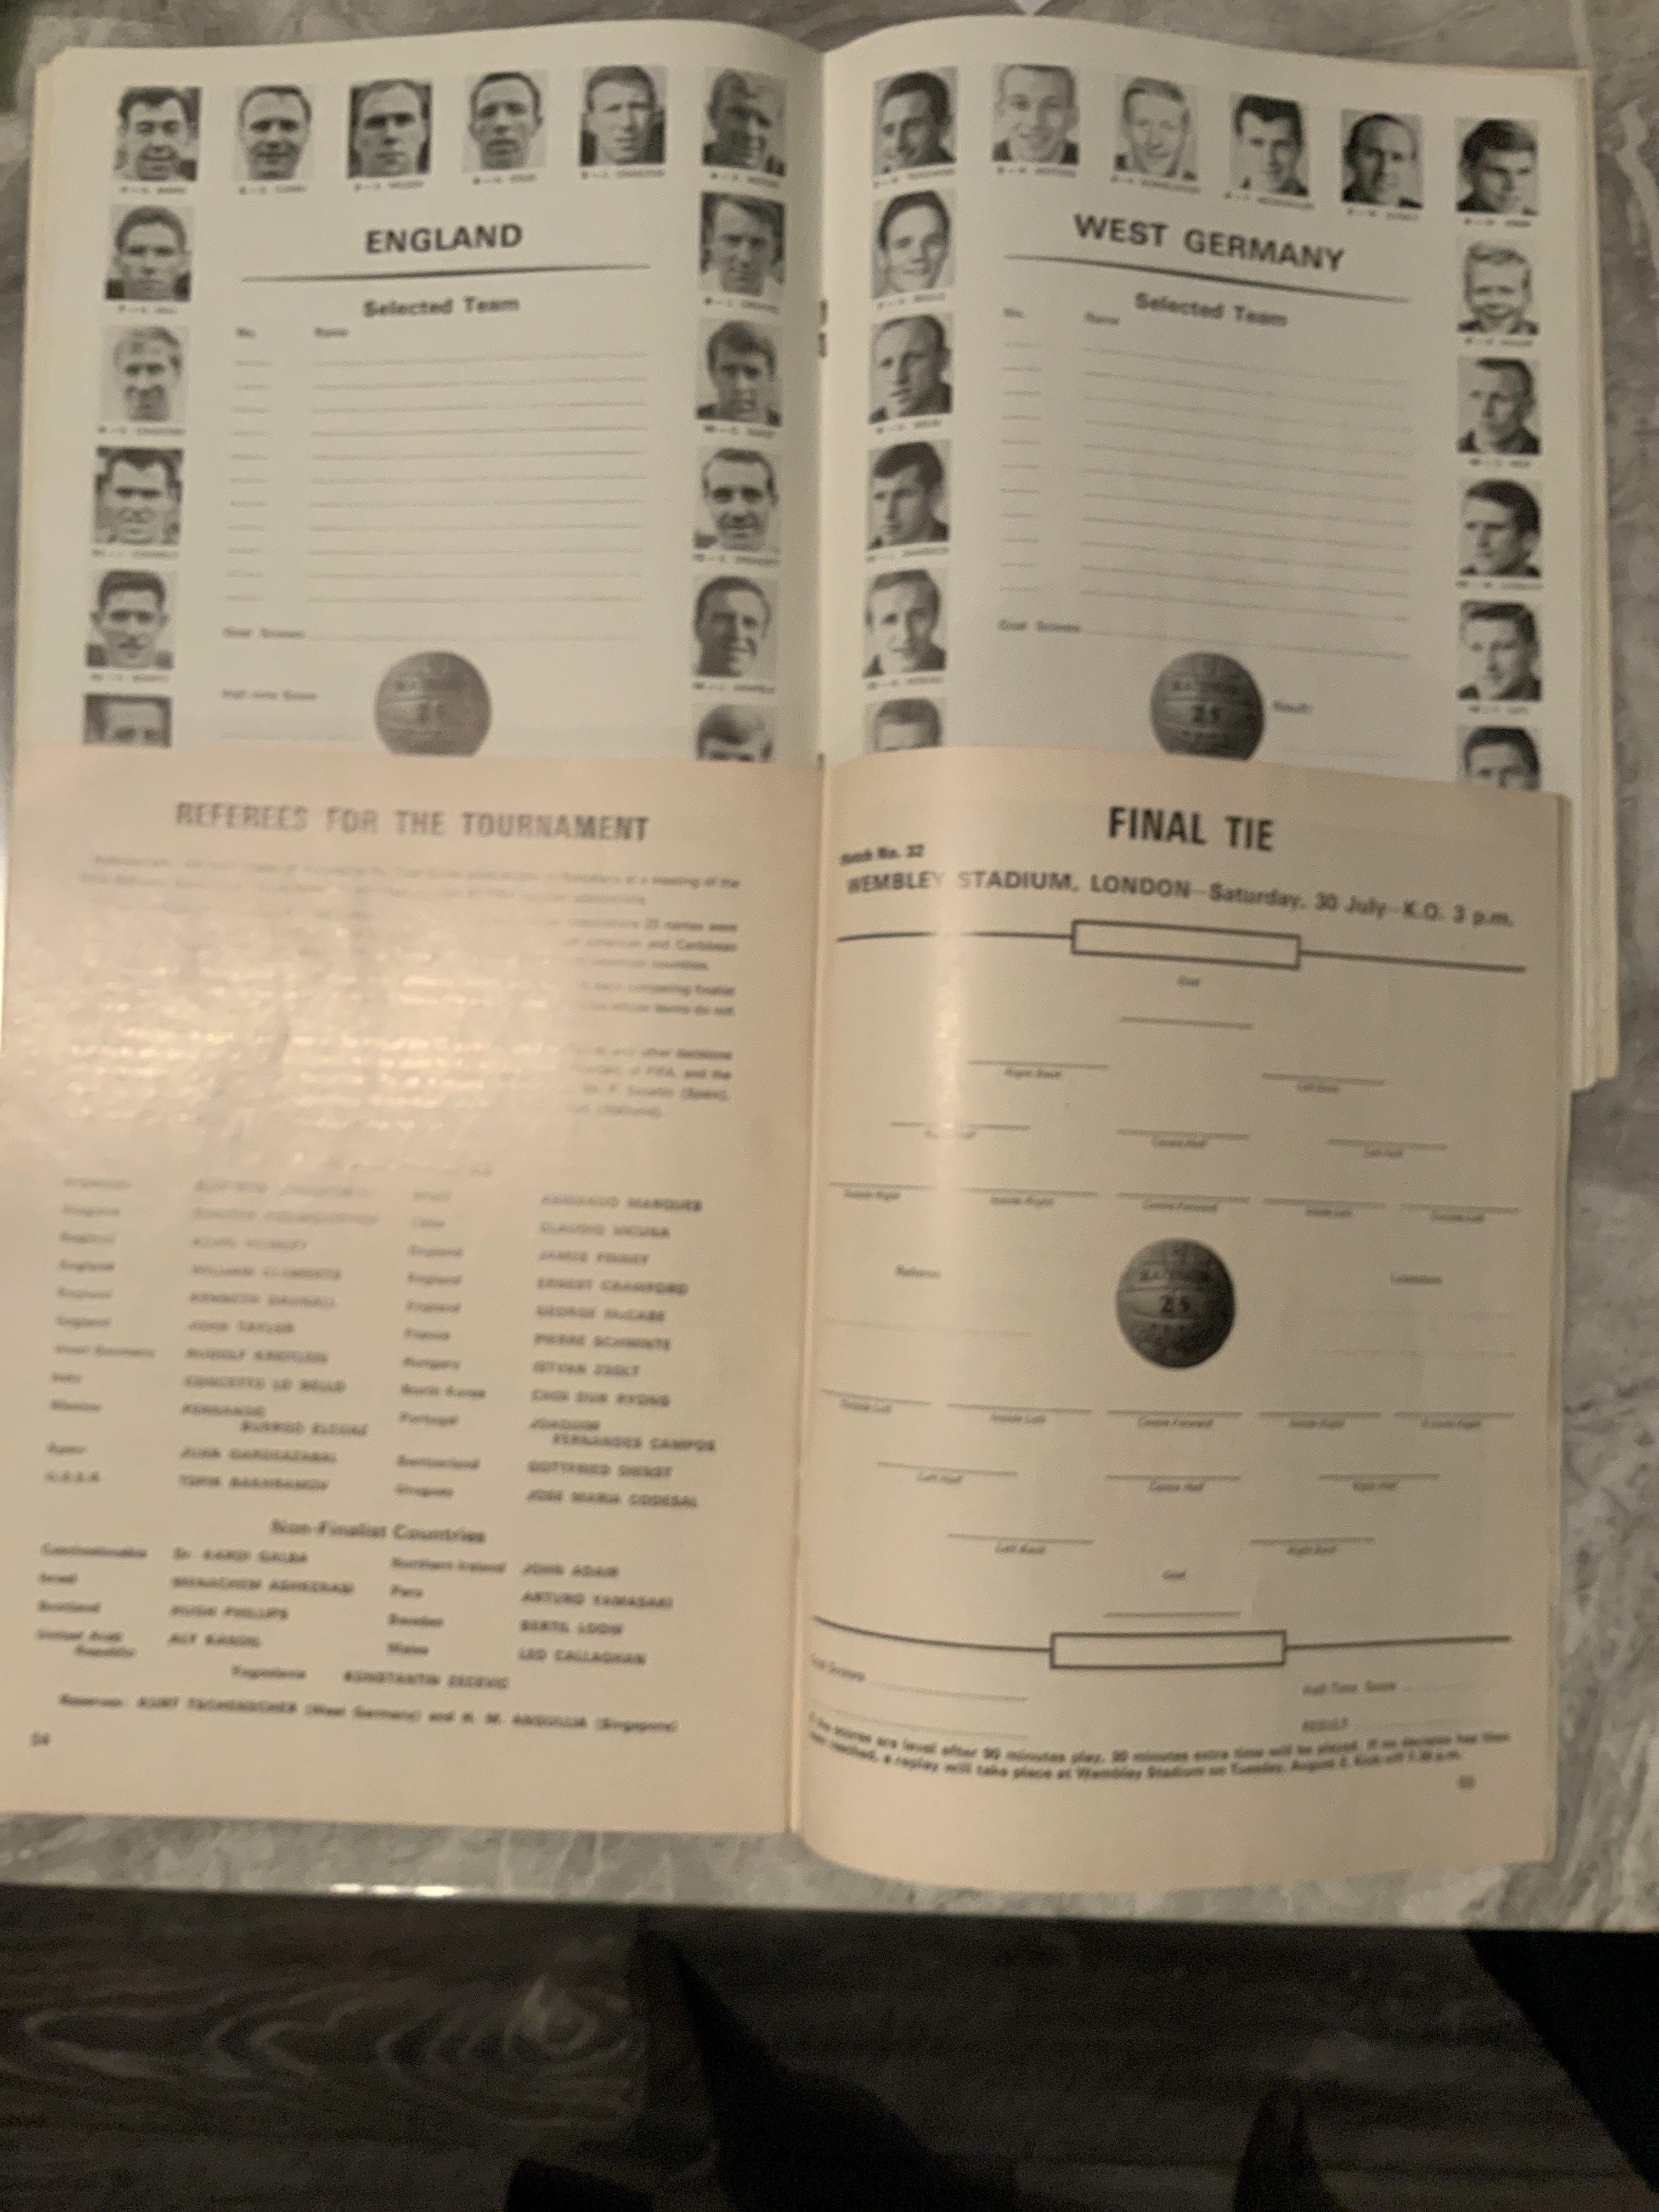 1966 World Cup Final Football Programme: Very good - Image 2 of 2